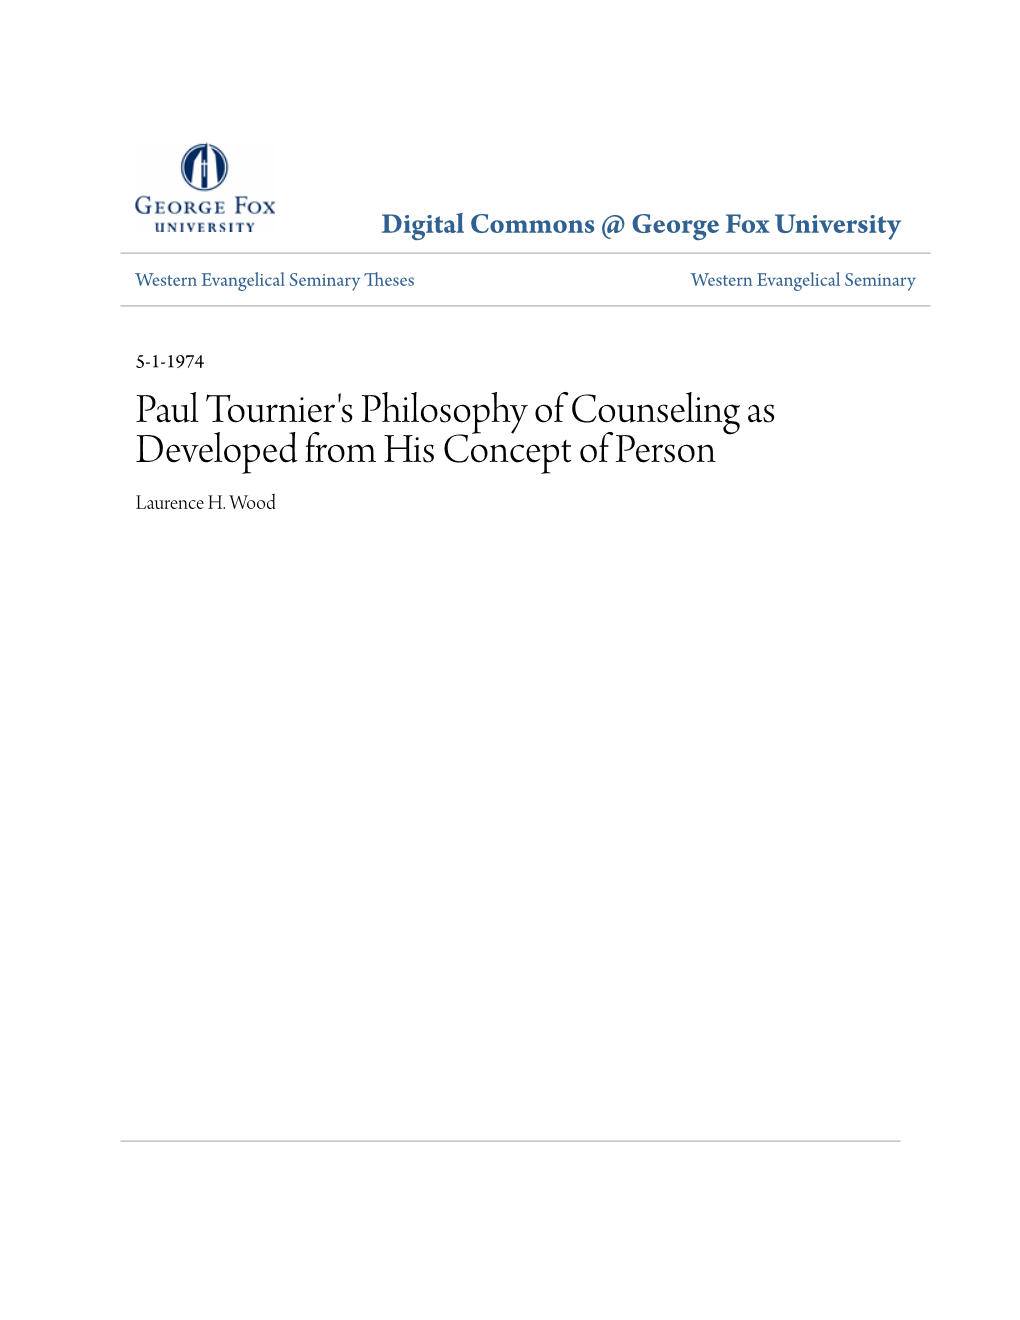 Paul Tournier's Philosophy of Counseling As Developed from His Concept of Person Laurence H